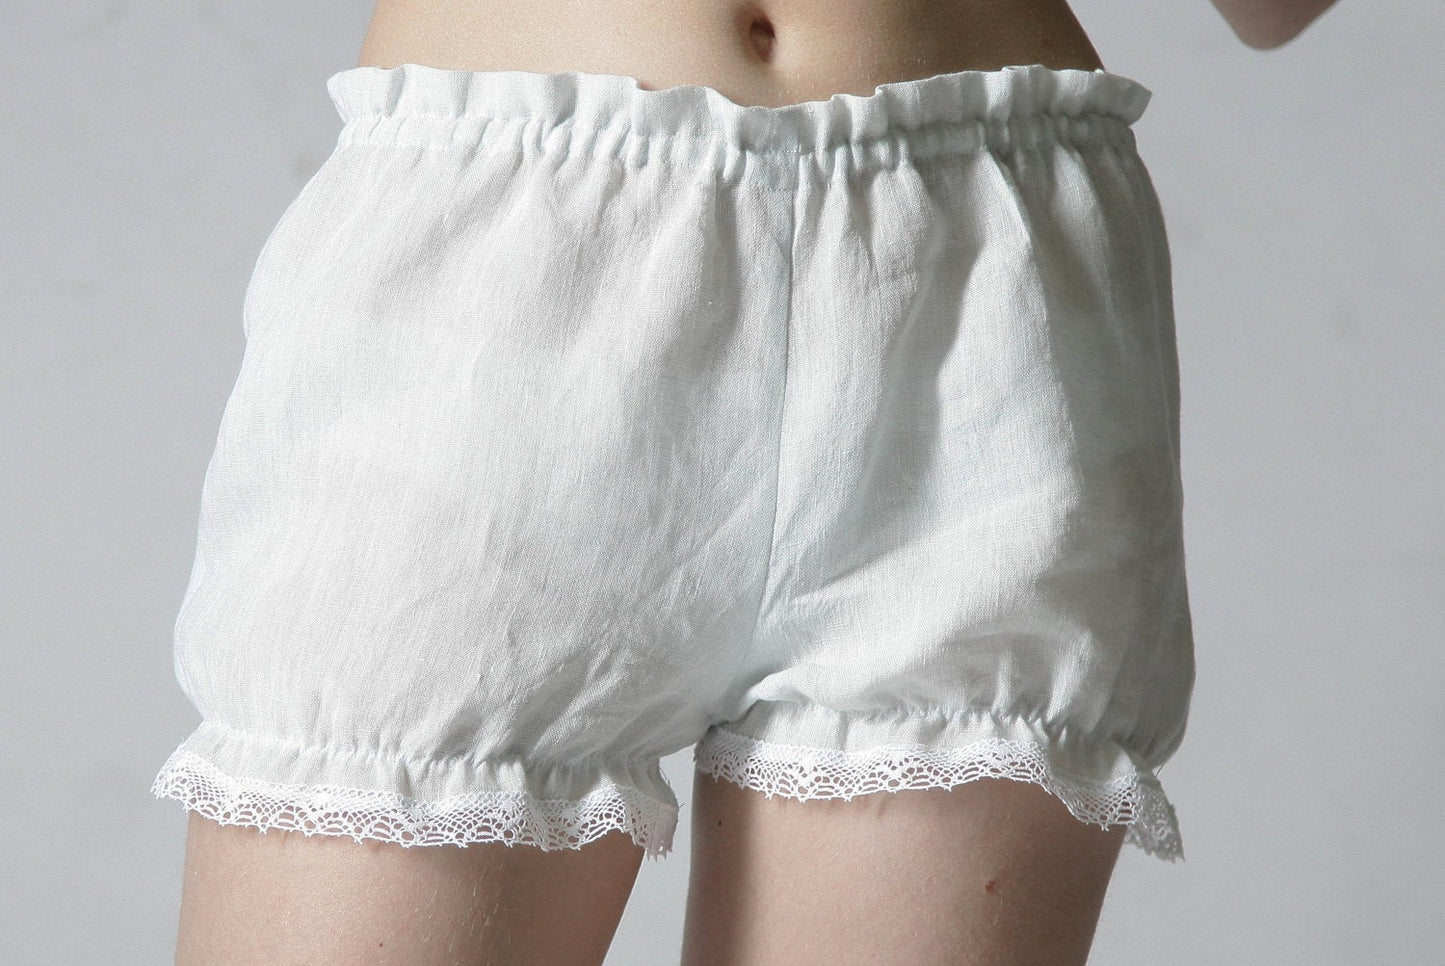 Linen Short BLOOMERS LACED for Woman/ Wictorian Style Undies